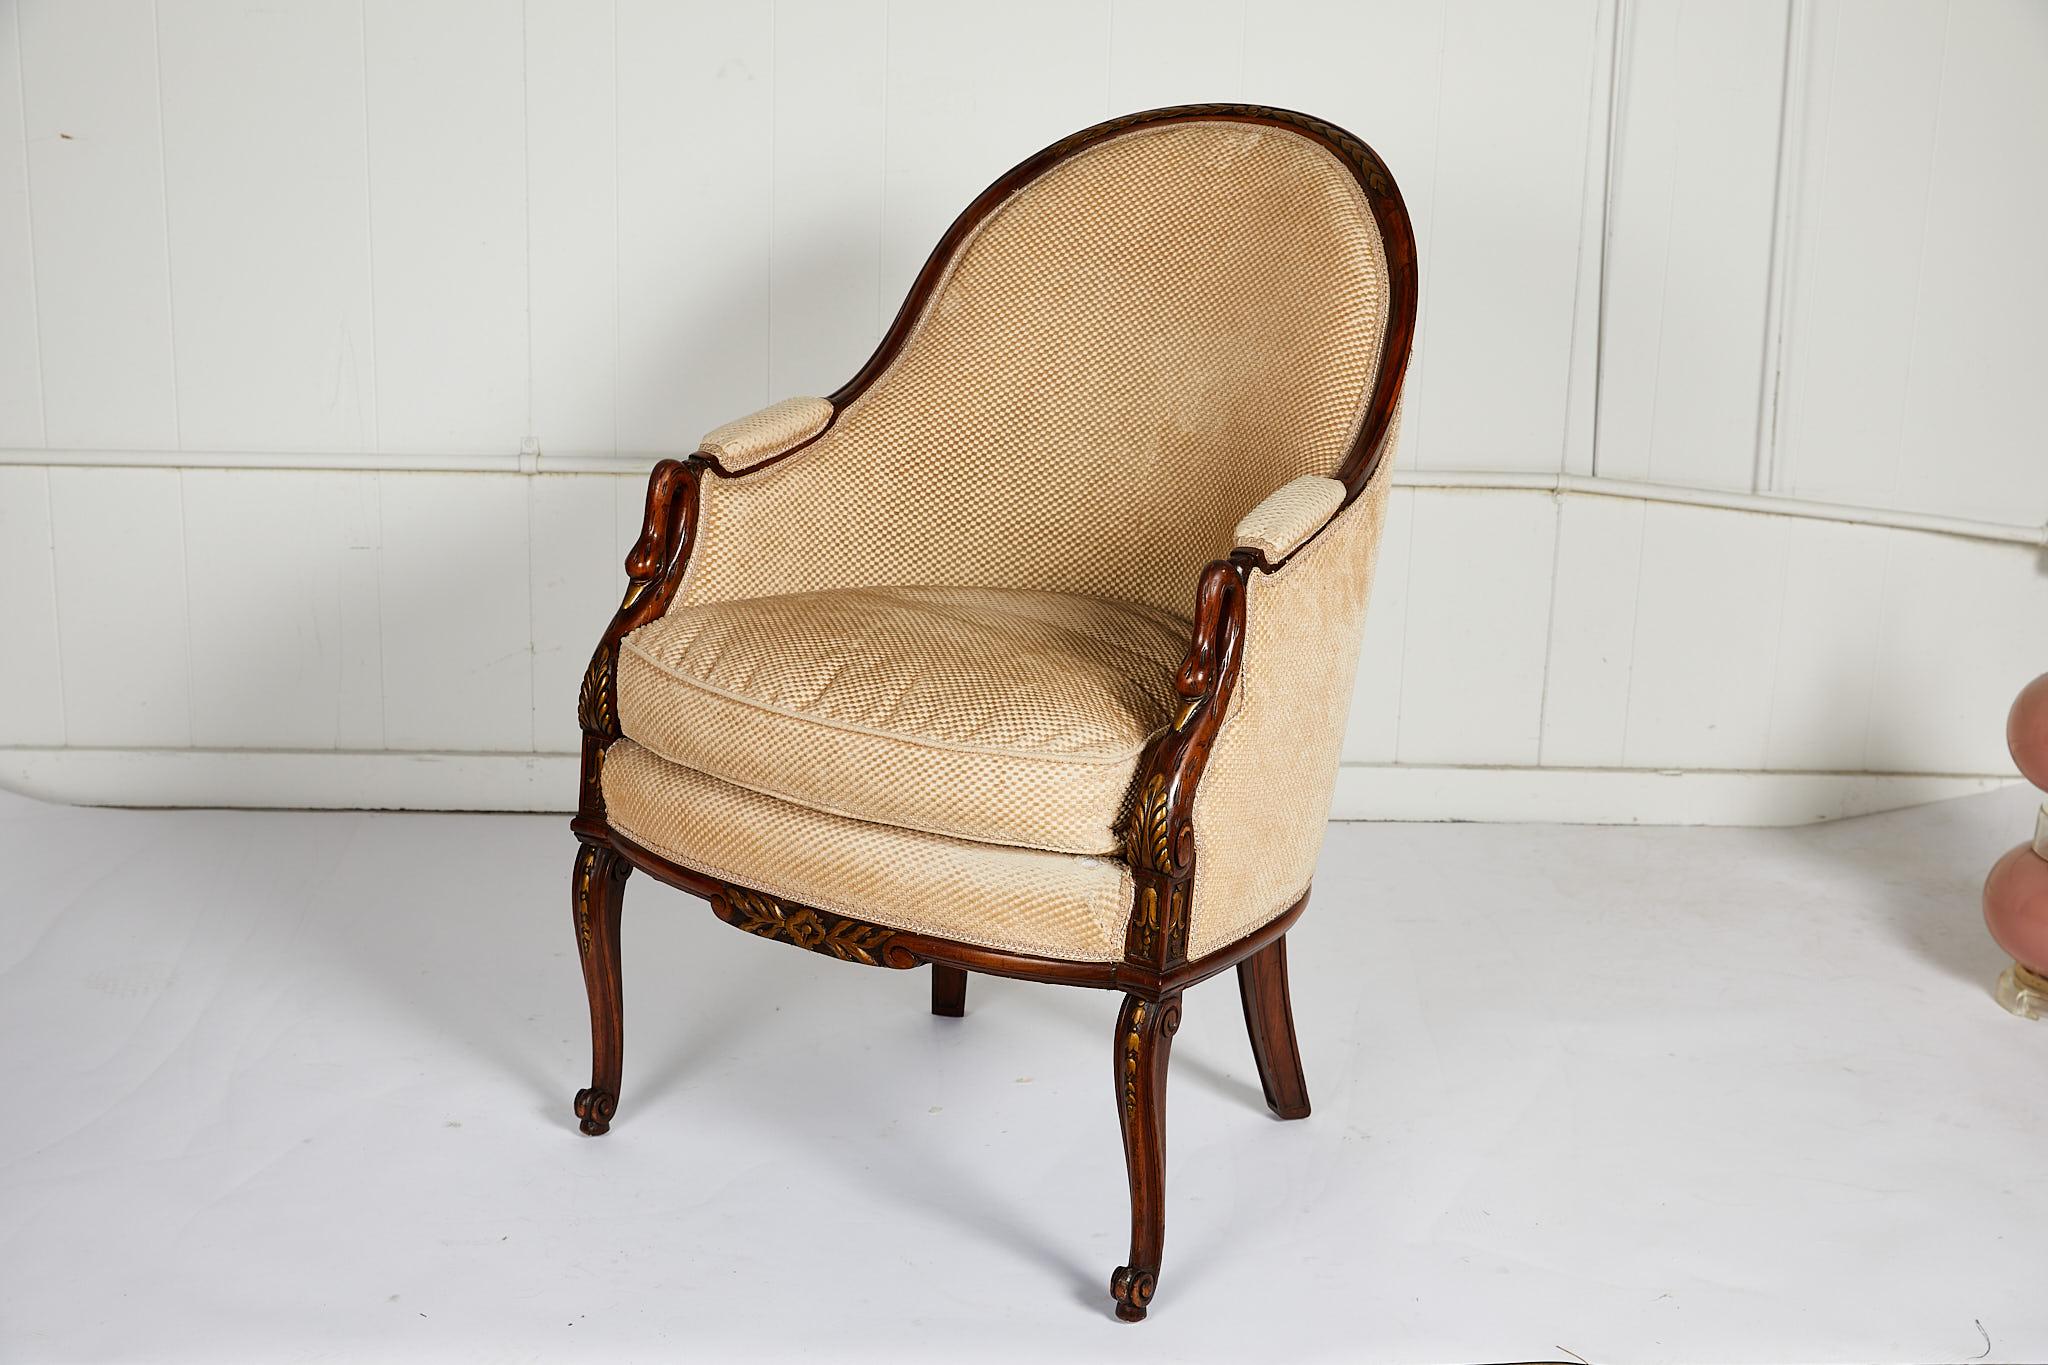 20th Century French Empire Style Swan Arm Tub Chair